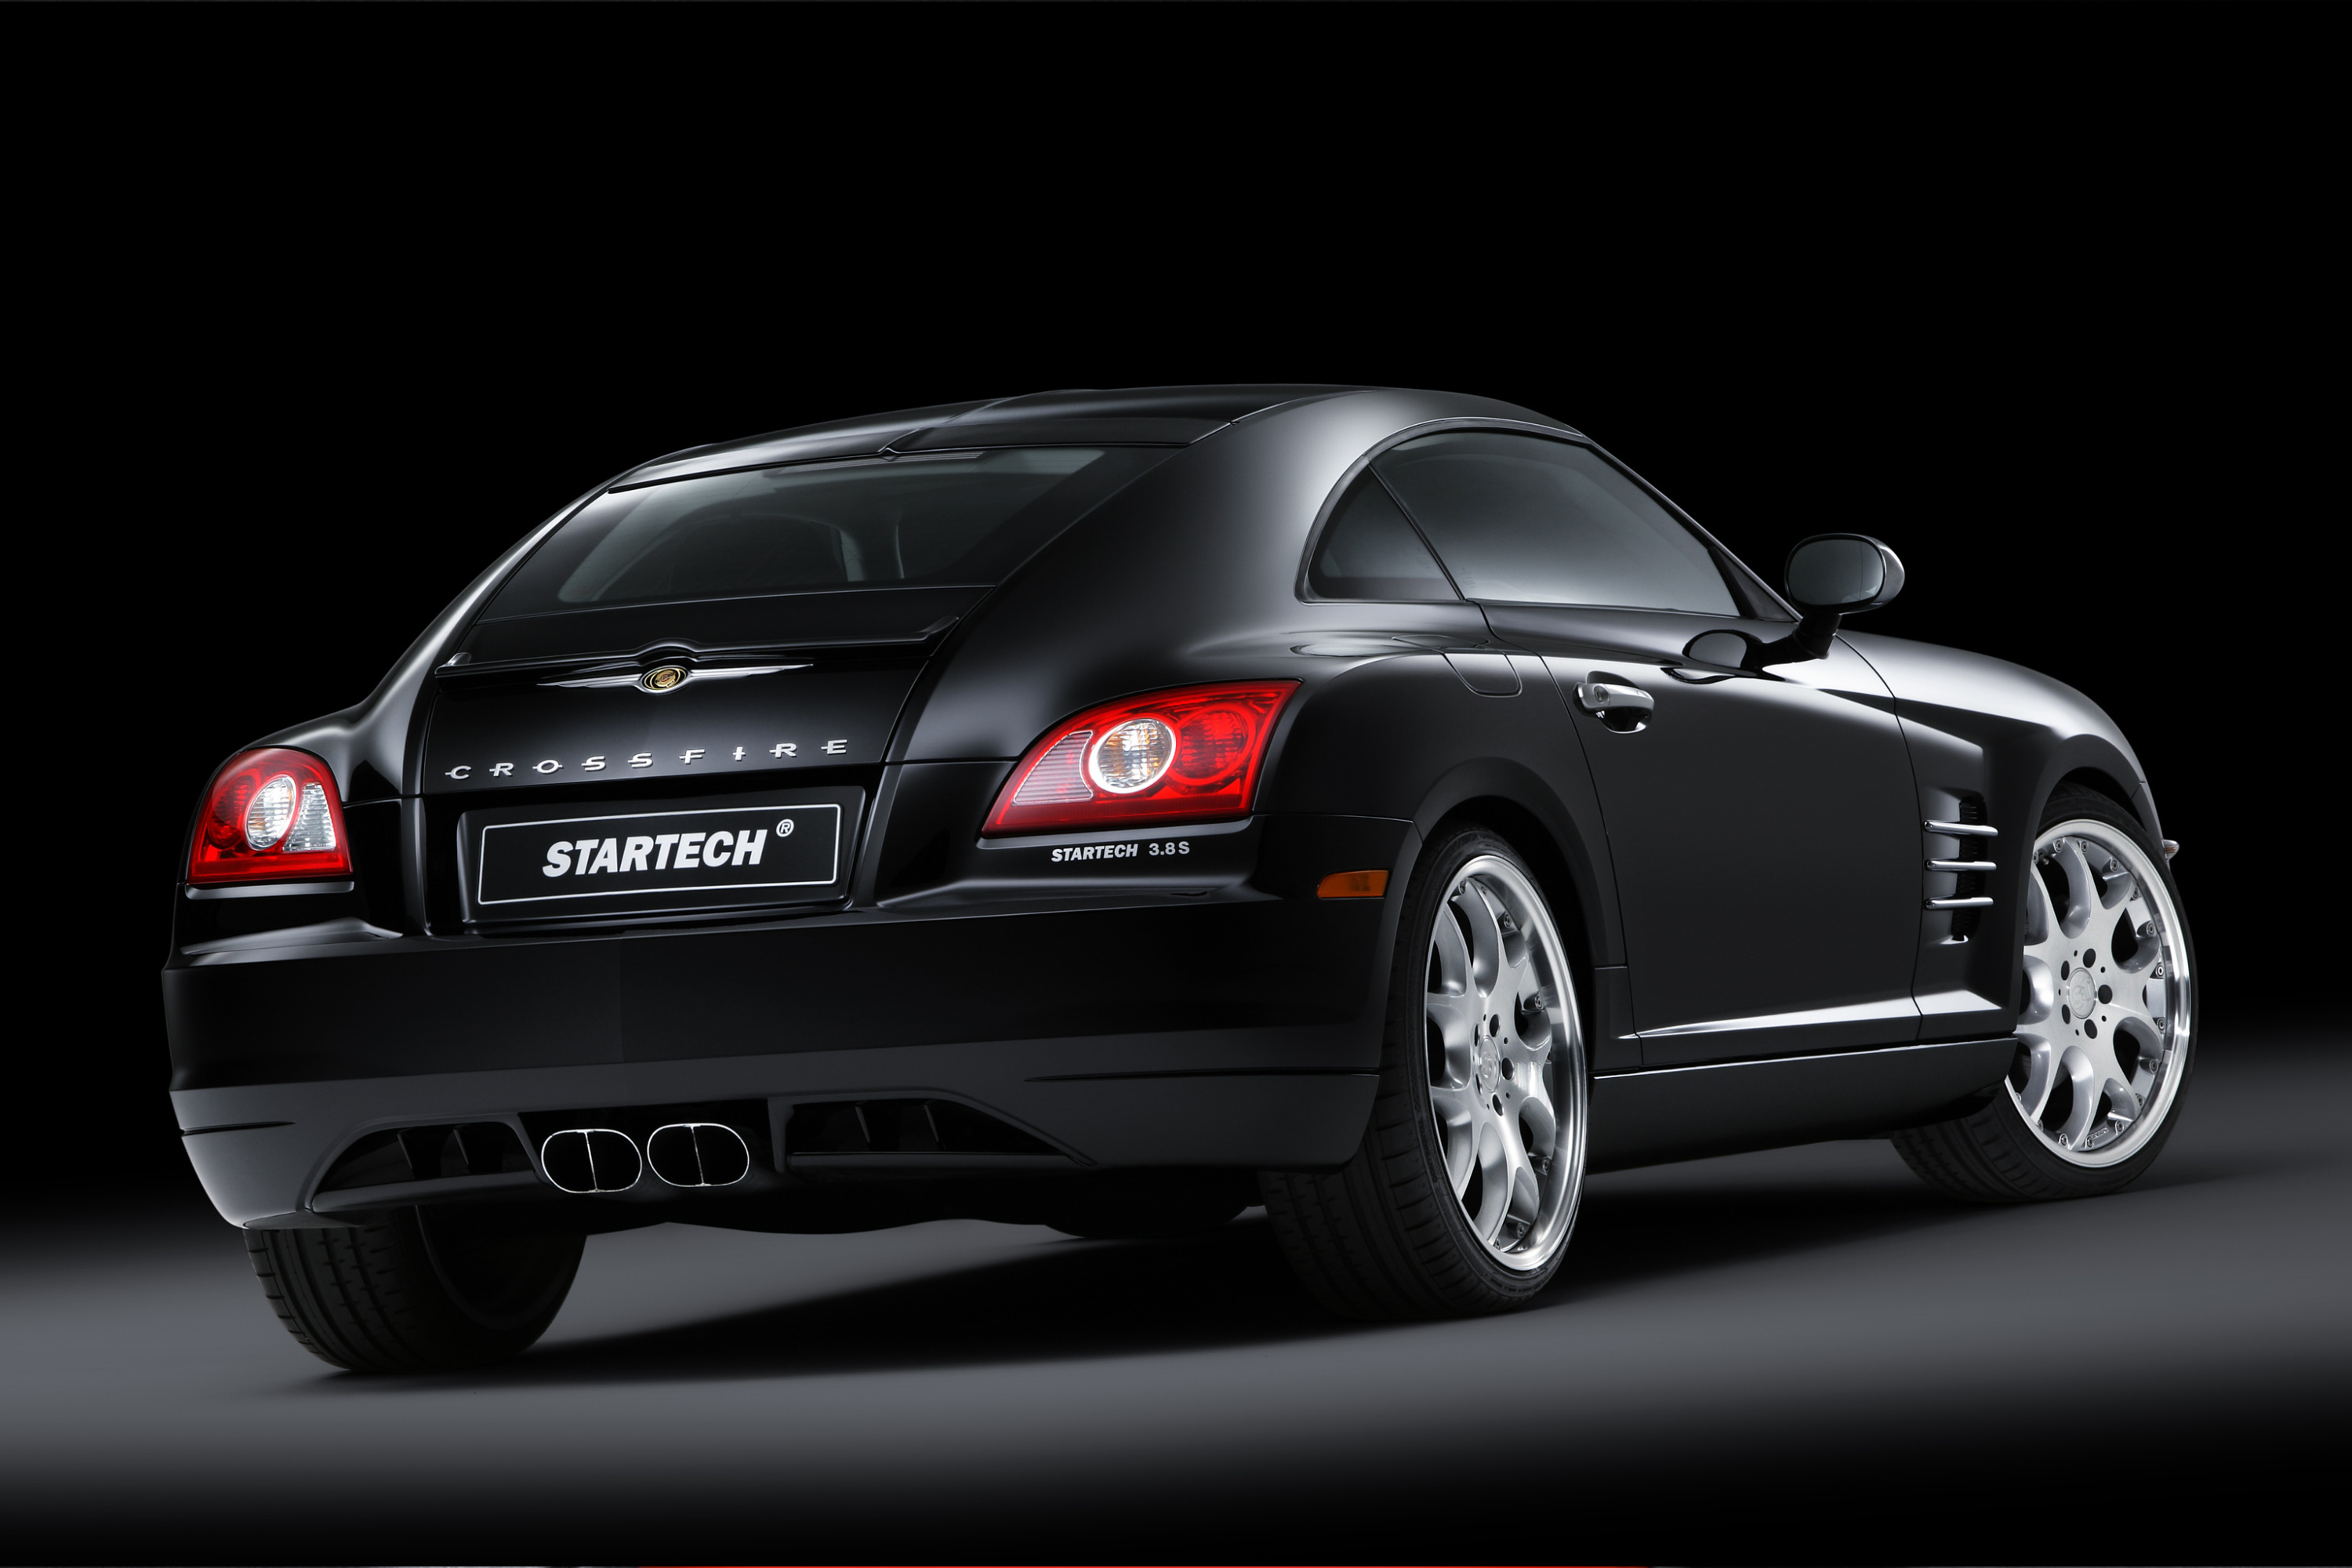 Chrysler crossfire competition #3